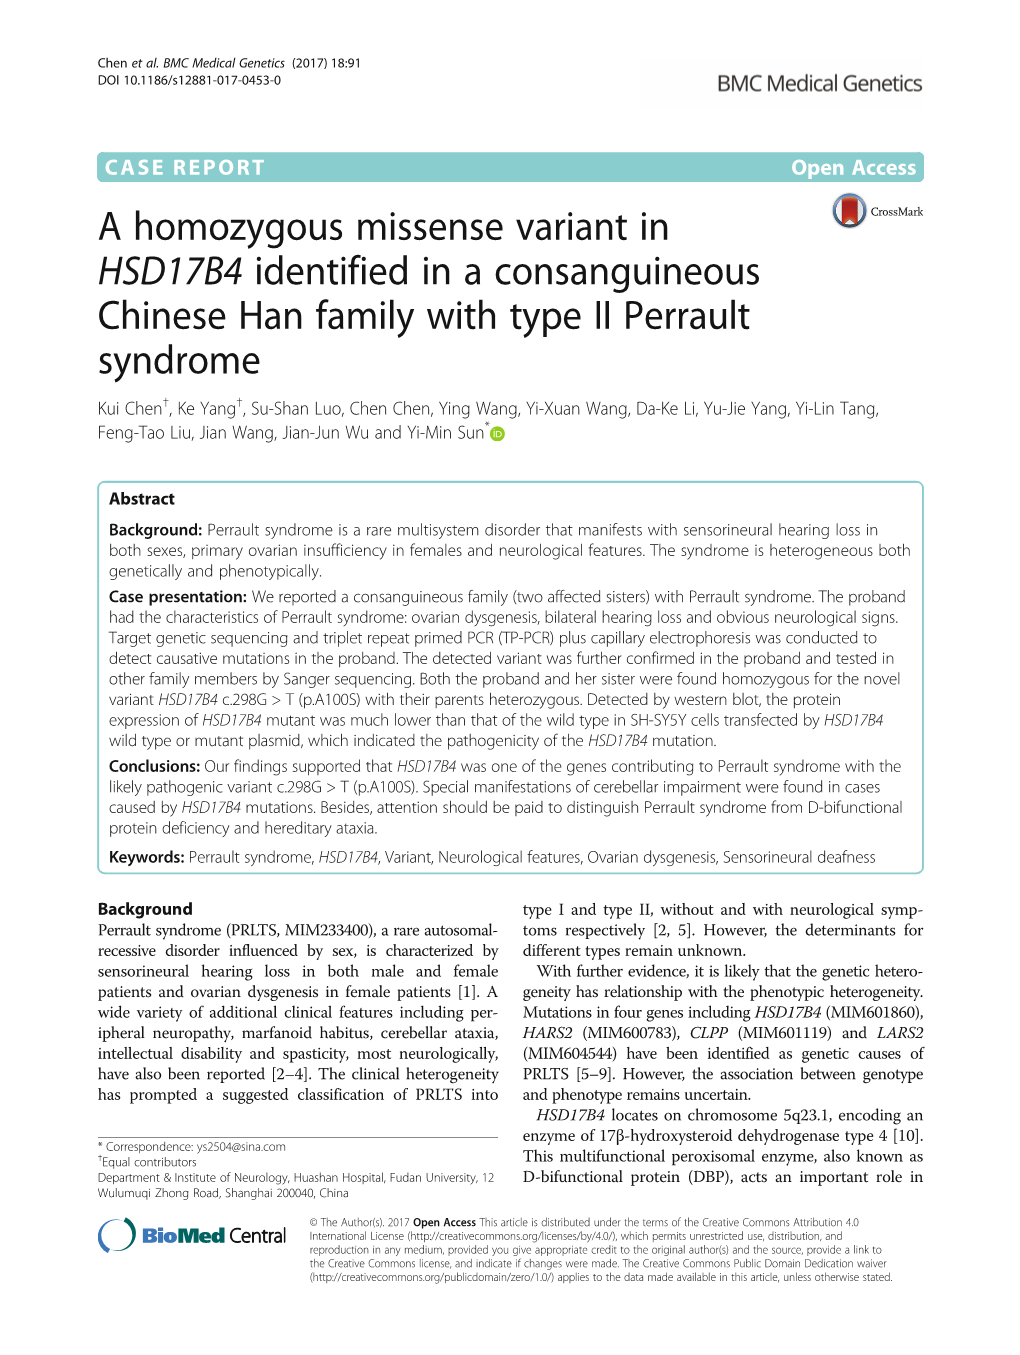 A Homozygous Missense Variant in HSD17B4 Identified in a Consanguineous Chinese Han Family with Type II Perrault Syndrome